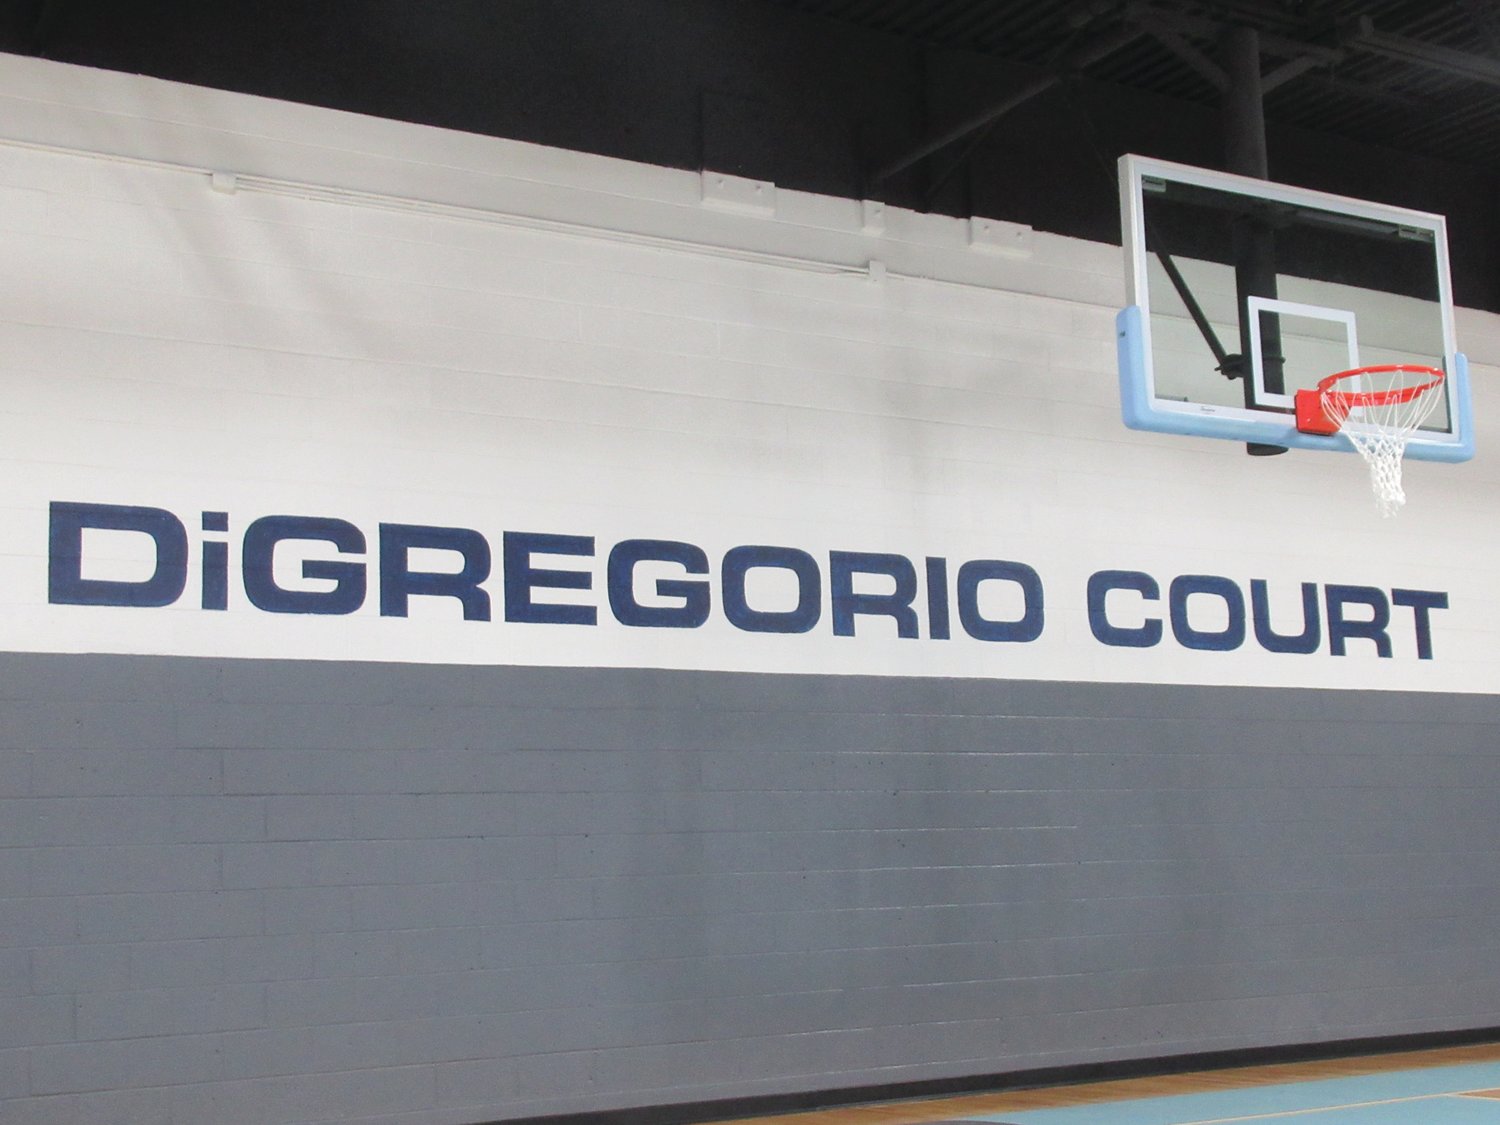 AWESOME APPRECIAITON: The new and shiny basketball court inside Rainone Gym is officially named the “DiGregorio Court” in honor of the countless contributions and money Rico DiGregorio and his company put into the project.